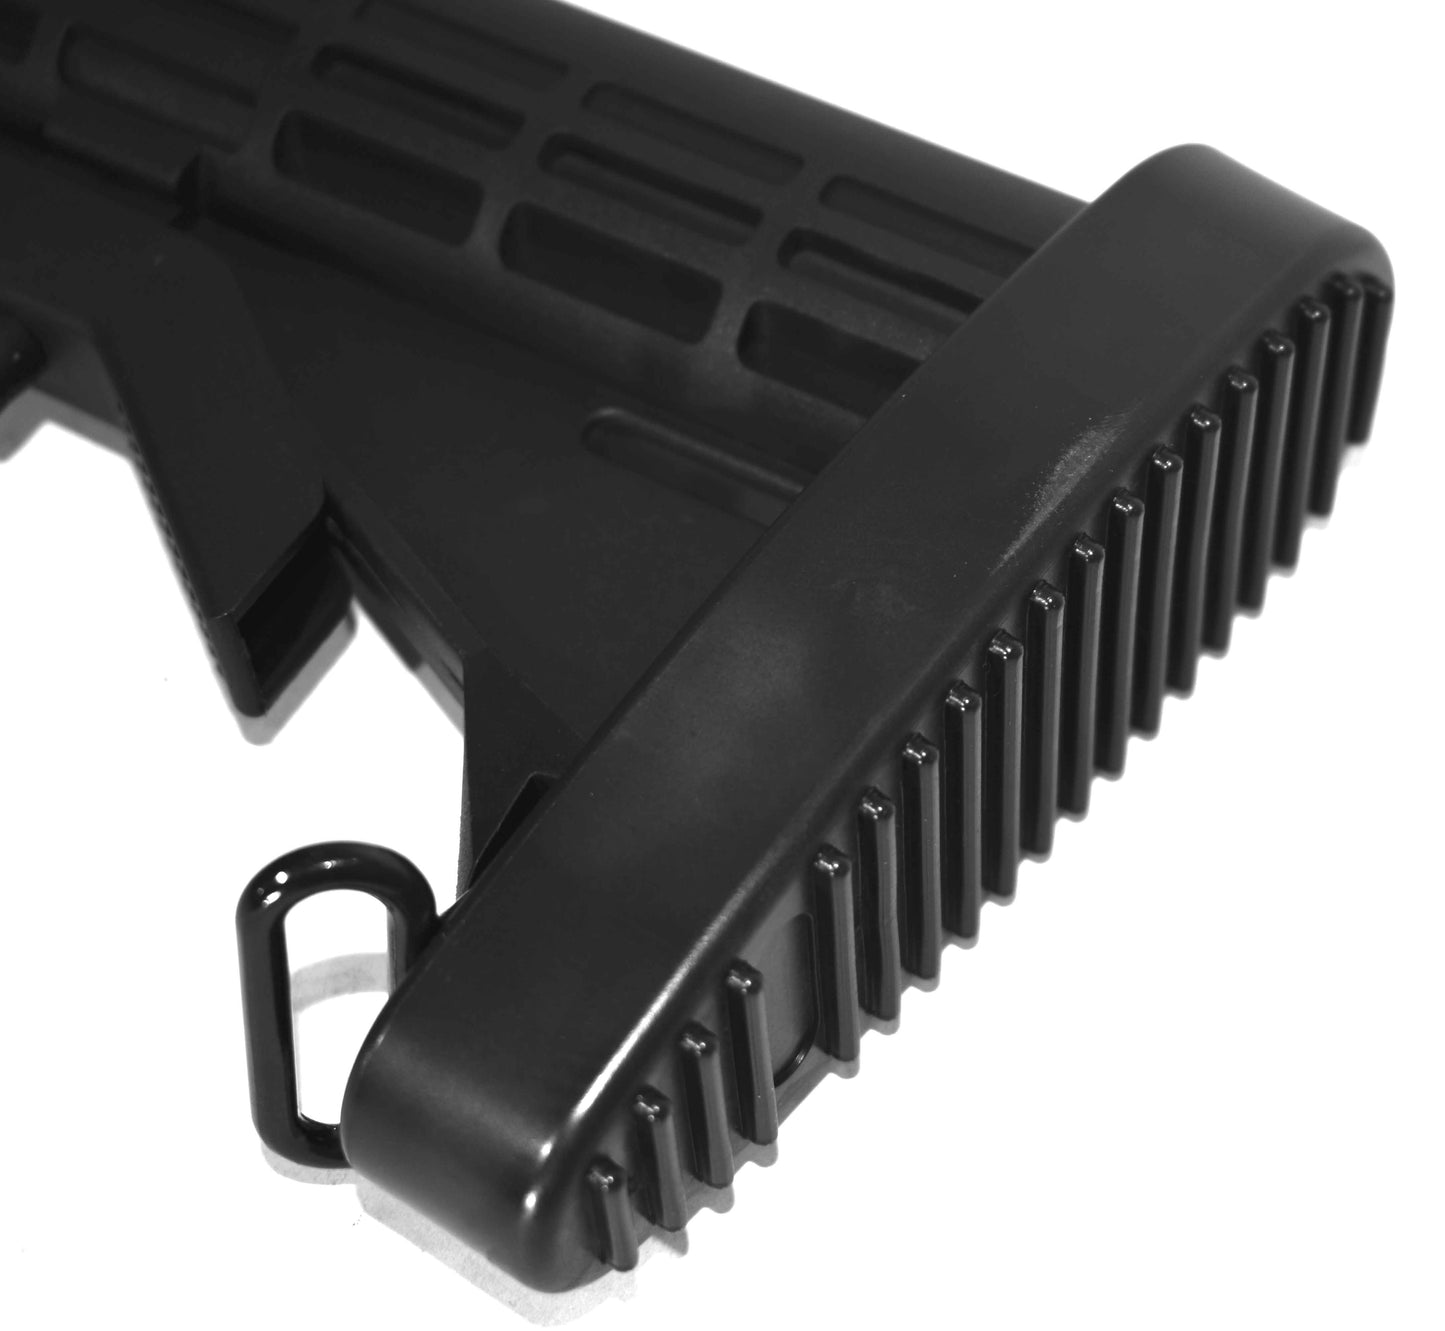 Tactical Adjustable Stock With Butt Pad Compatible With mil-spec threaded Mossberg 500 and Remington 870 pistol grips.